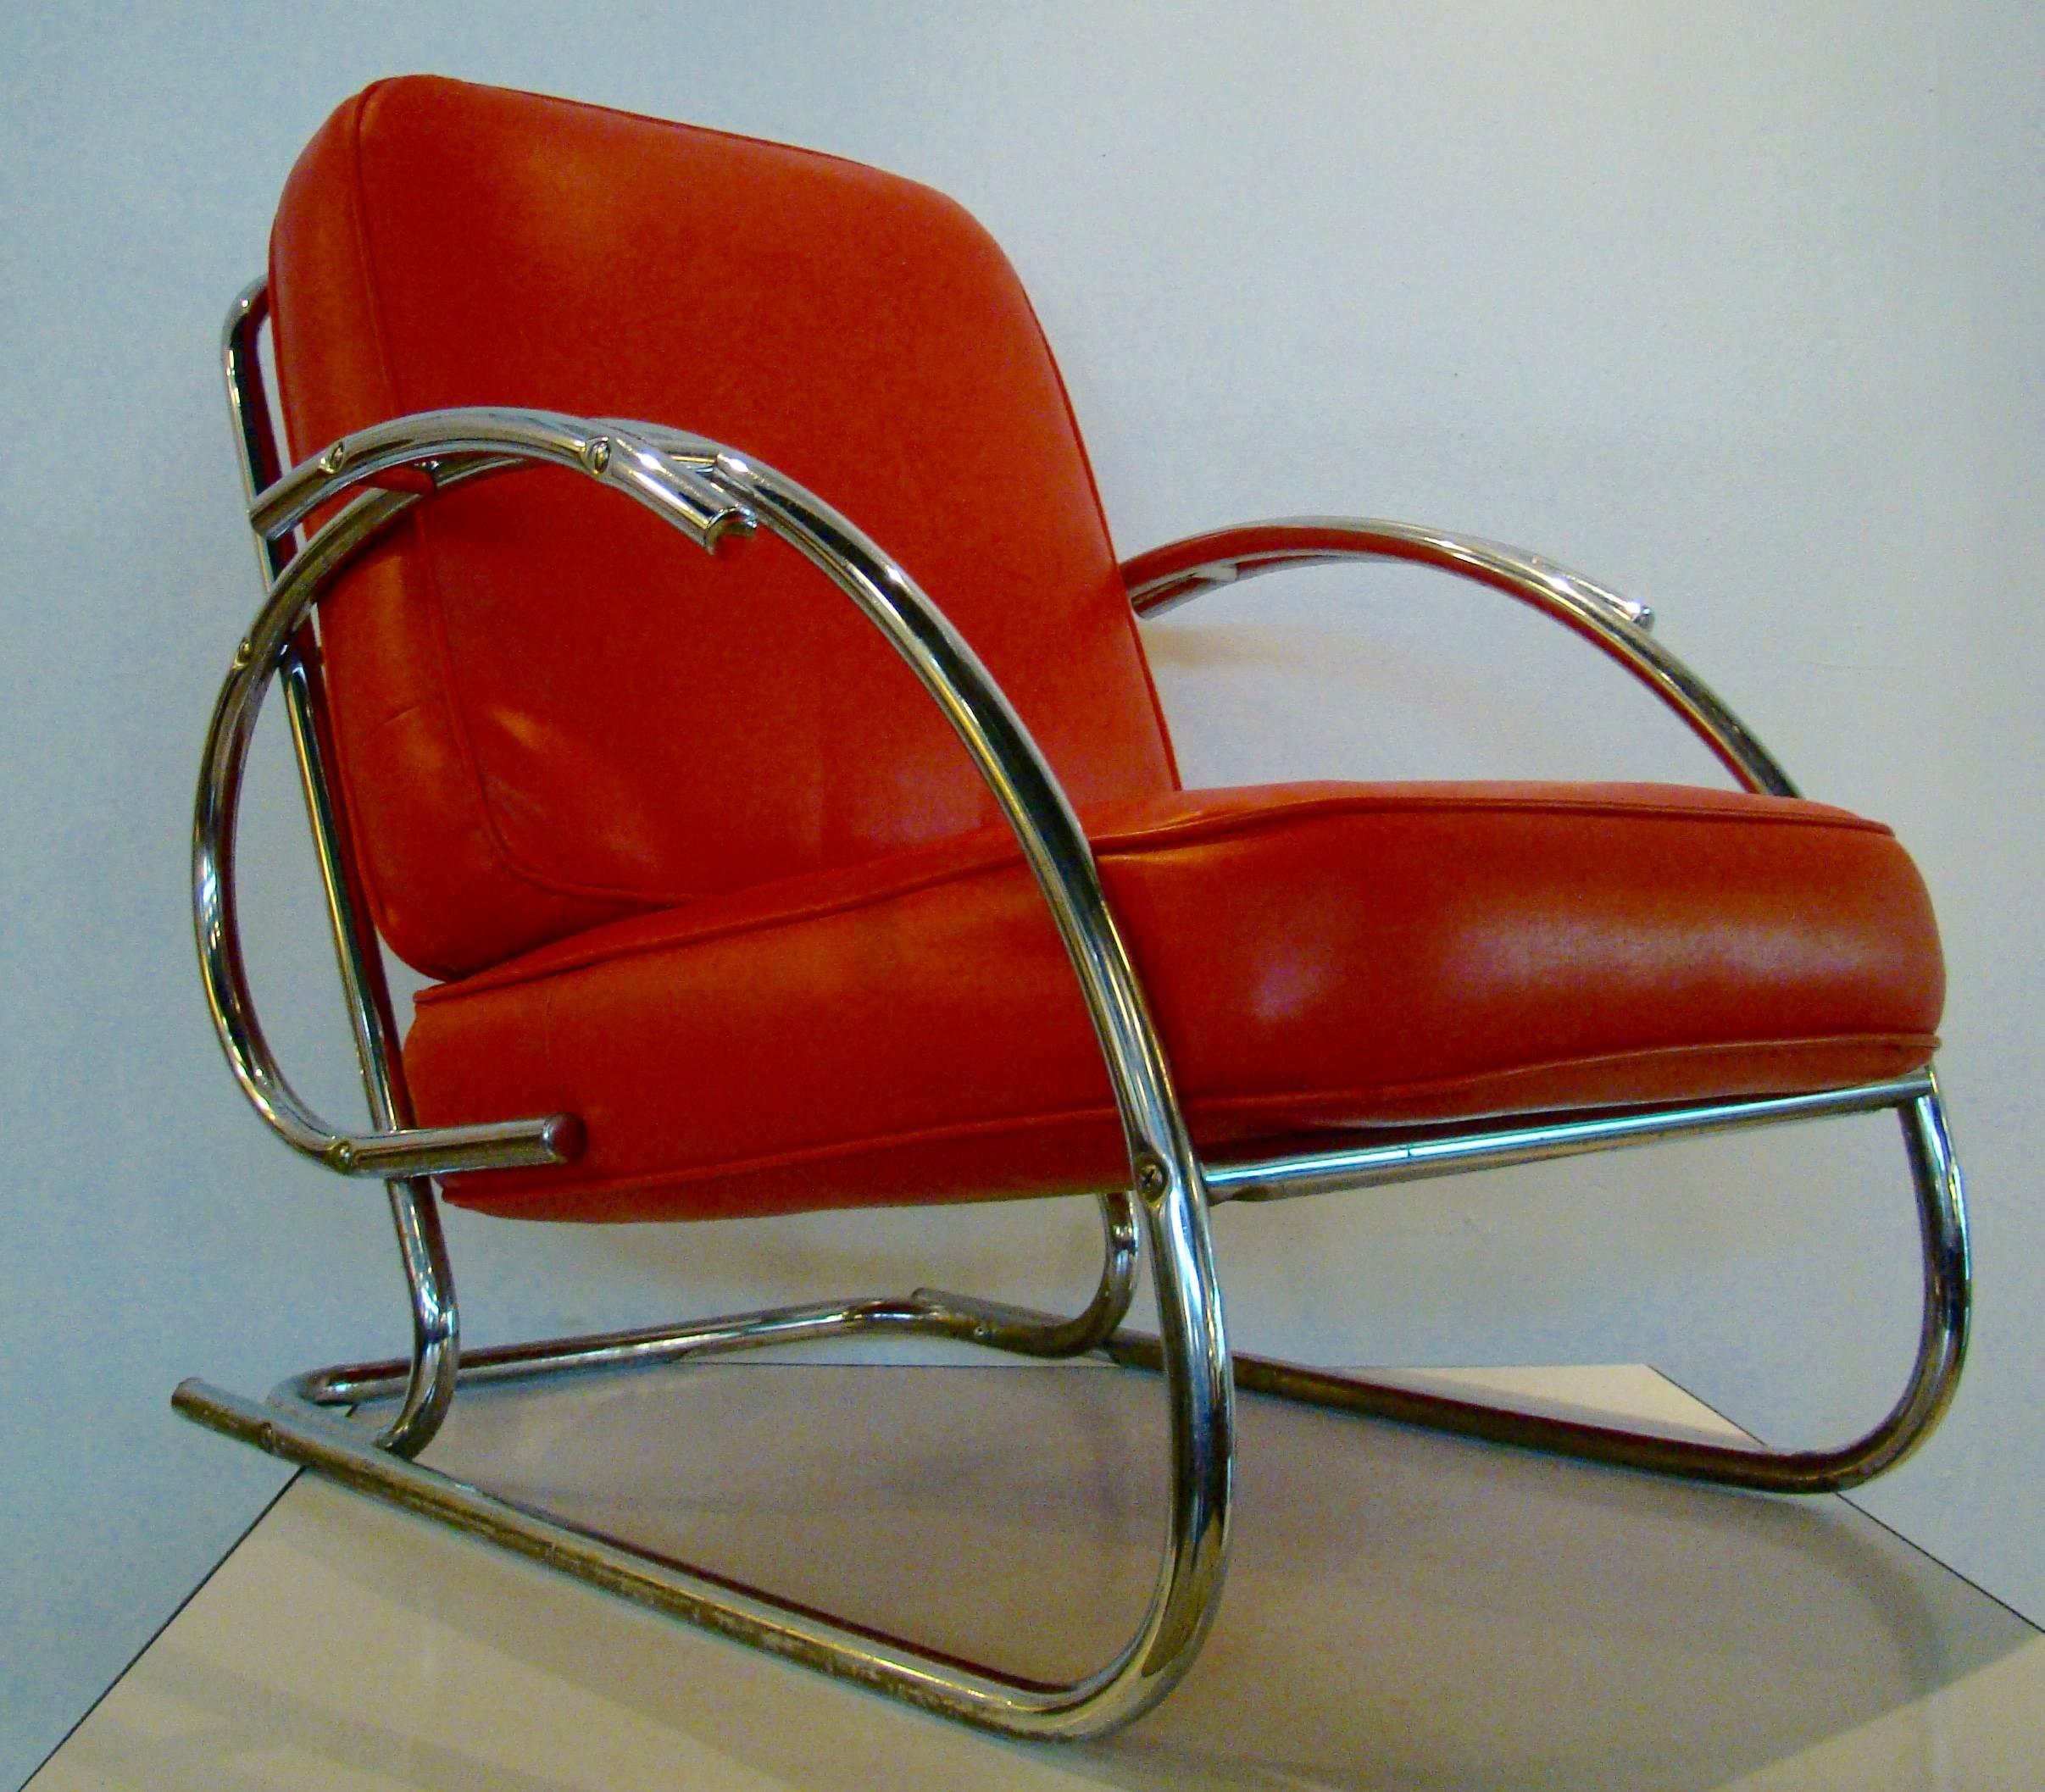 Mid-20th Century Art Deco/Machine Age Chrome Lounge Chair Attributed to KEM Weber